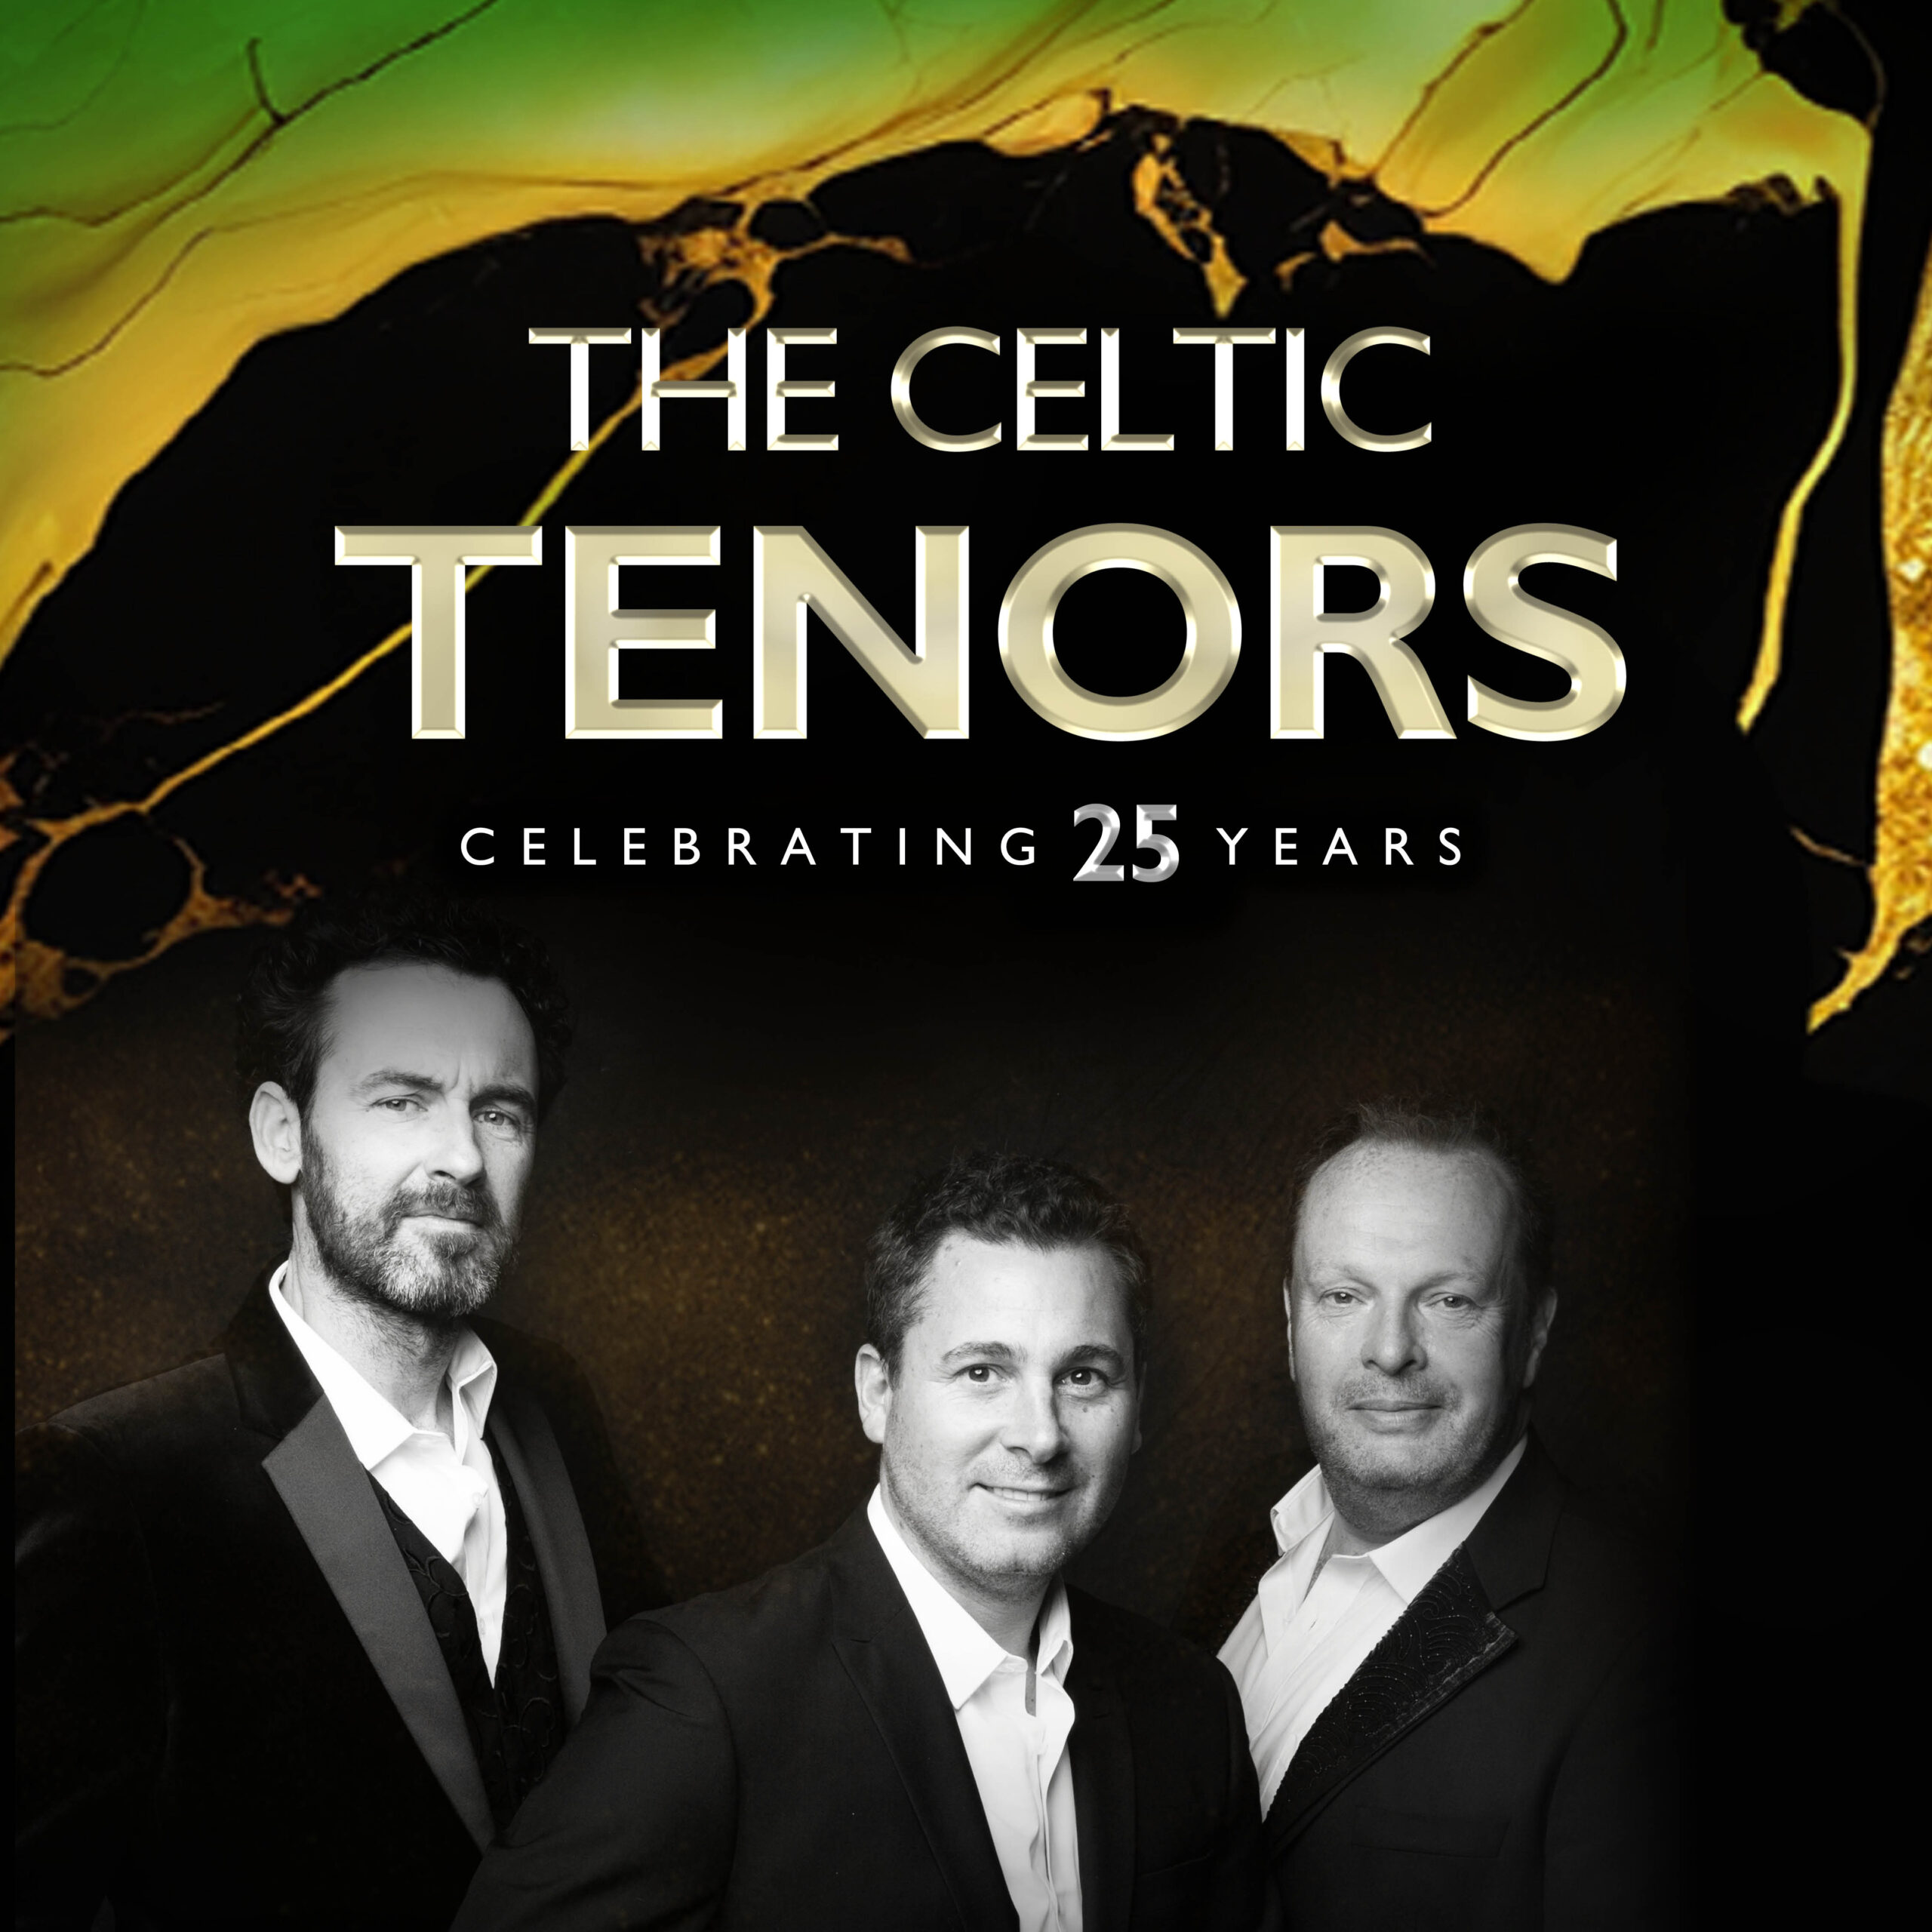 THE CELTIC TENORS - The Birchmere